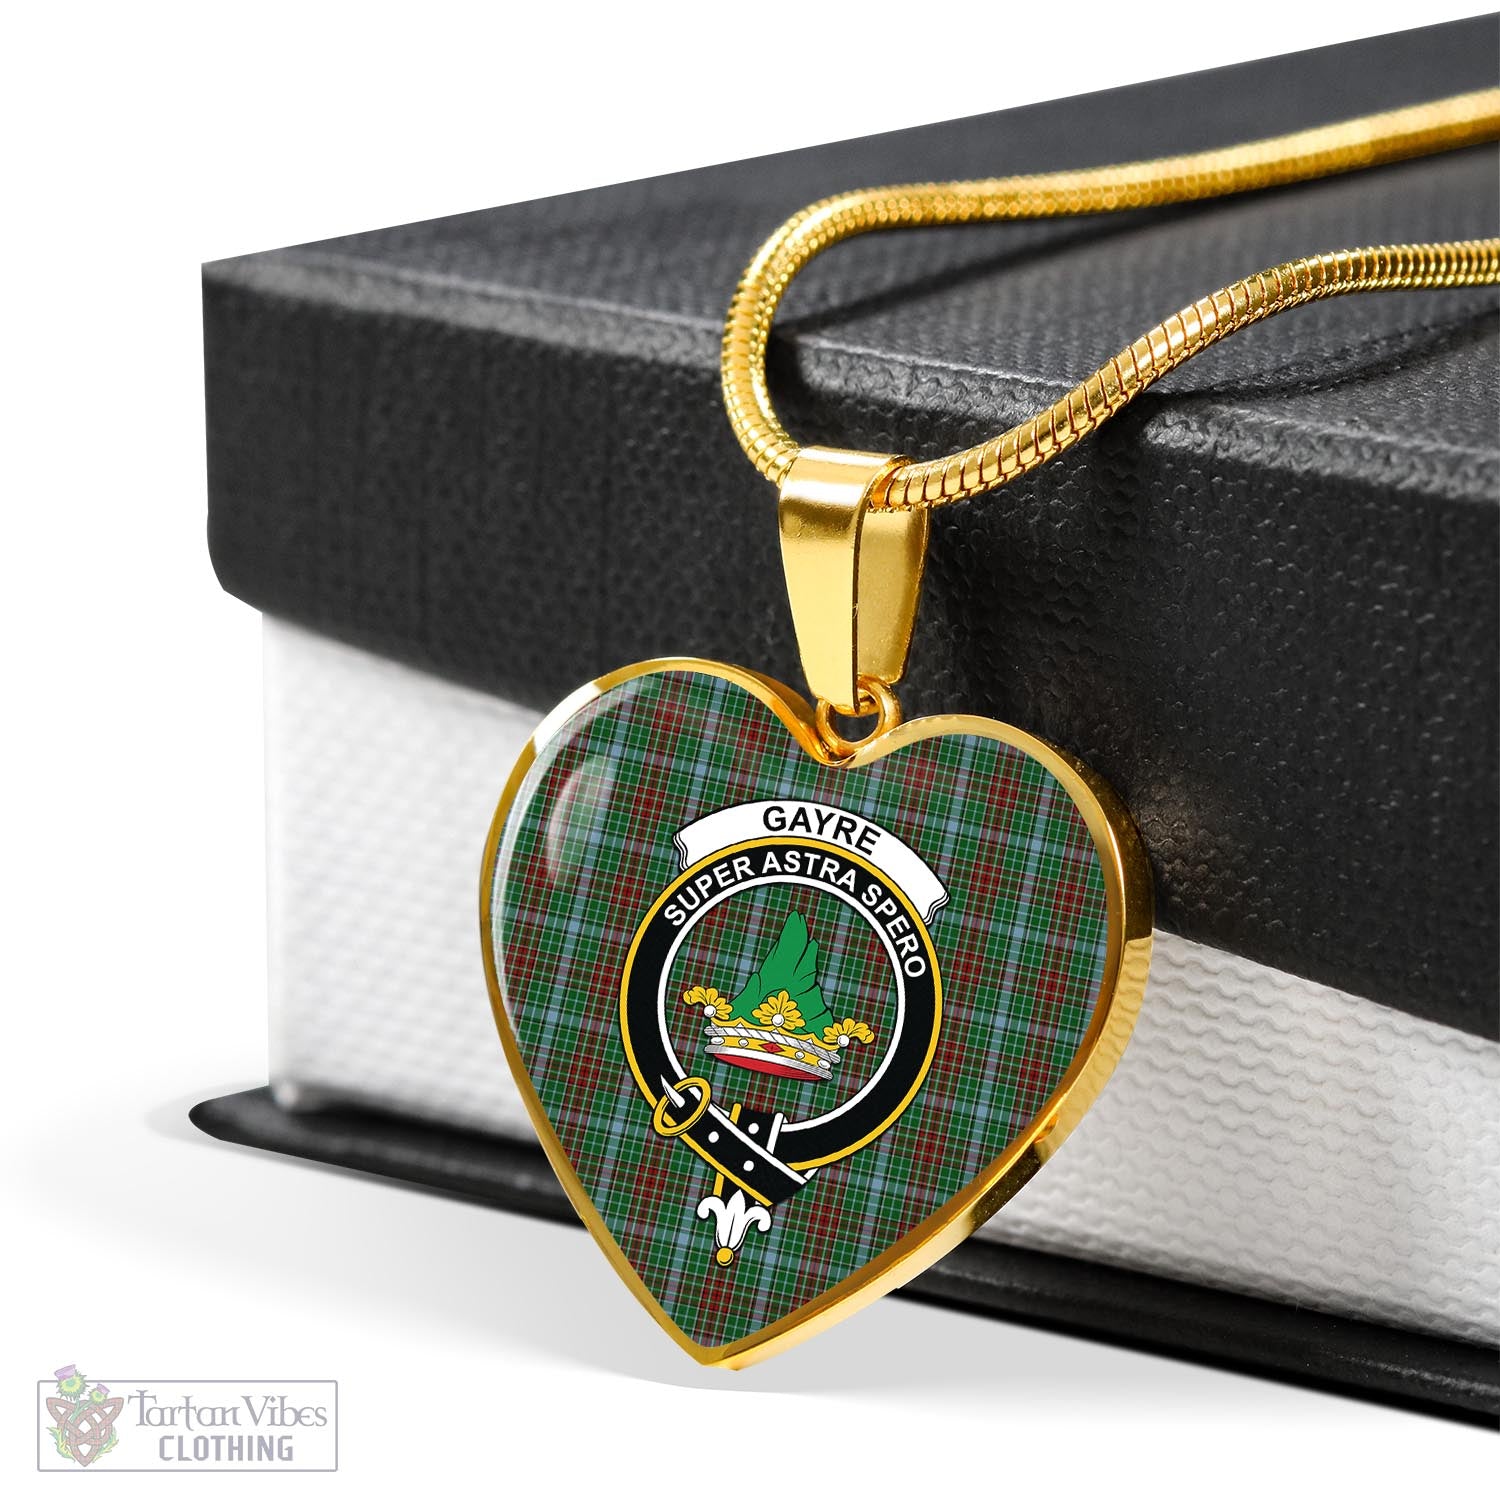 Tartan Vibes Clothing Gayre Tartan Heart Necklace with Family Crest